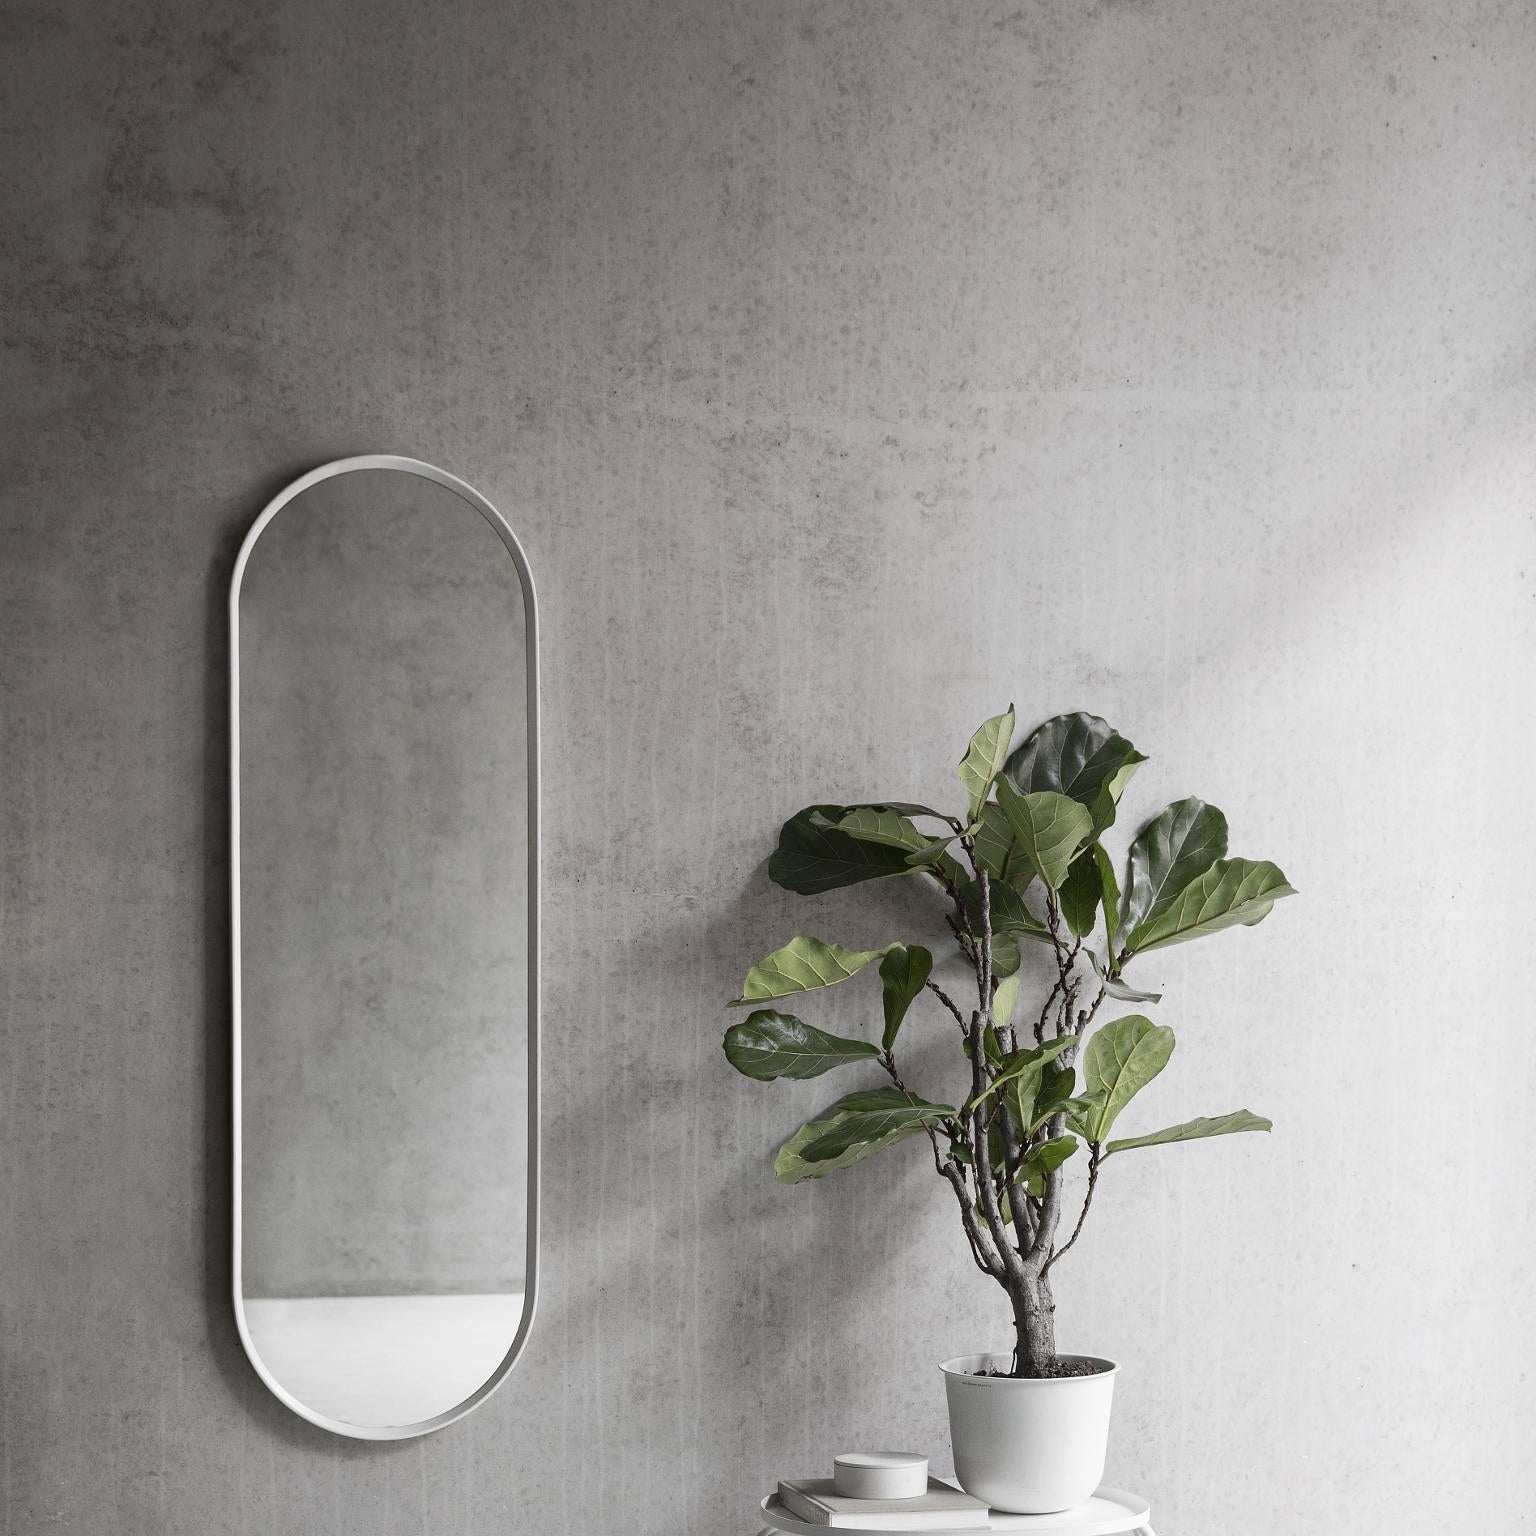 Inspired by vintage dressing room mirrors, oval mirror is simple and streamlined. A practical and versatile mirror, use it in the bathroom, hallway or dressing-room. Oval mirror is part of a series by Norm Architects, each mirror made with a